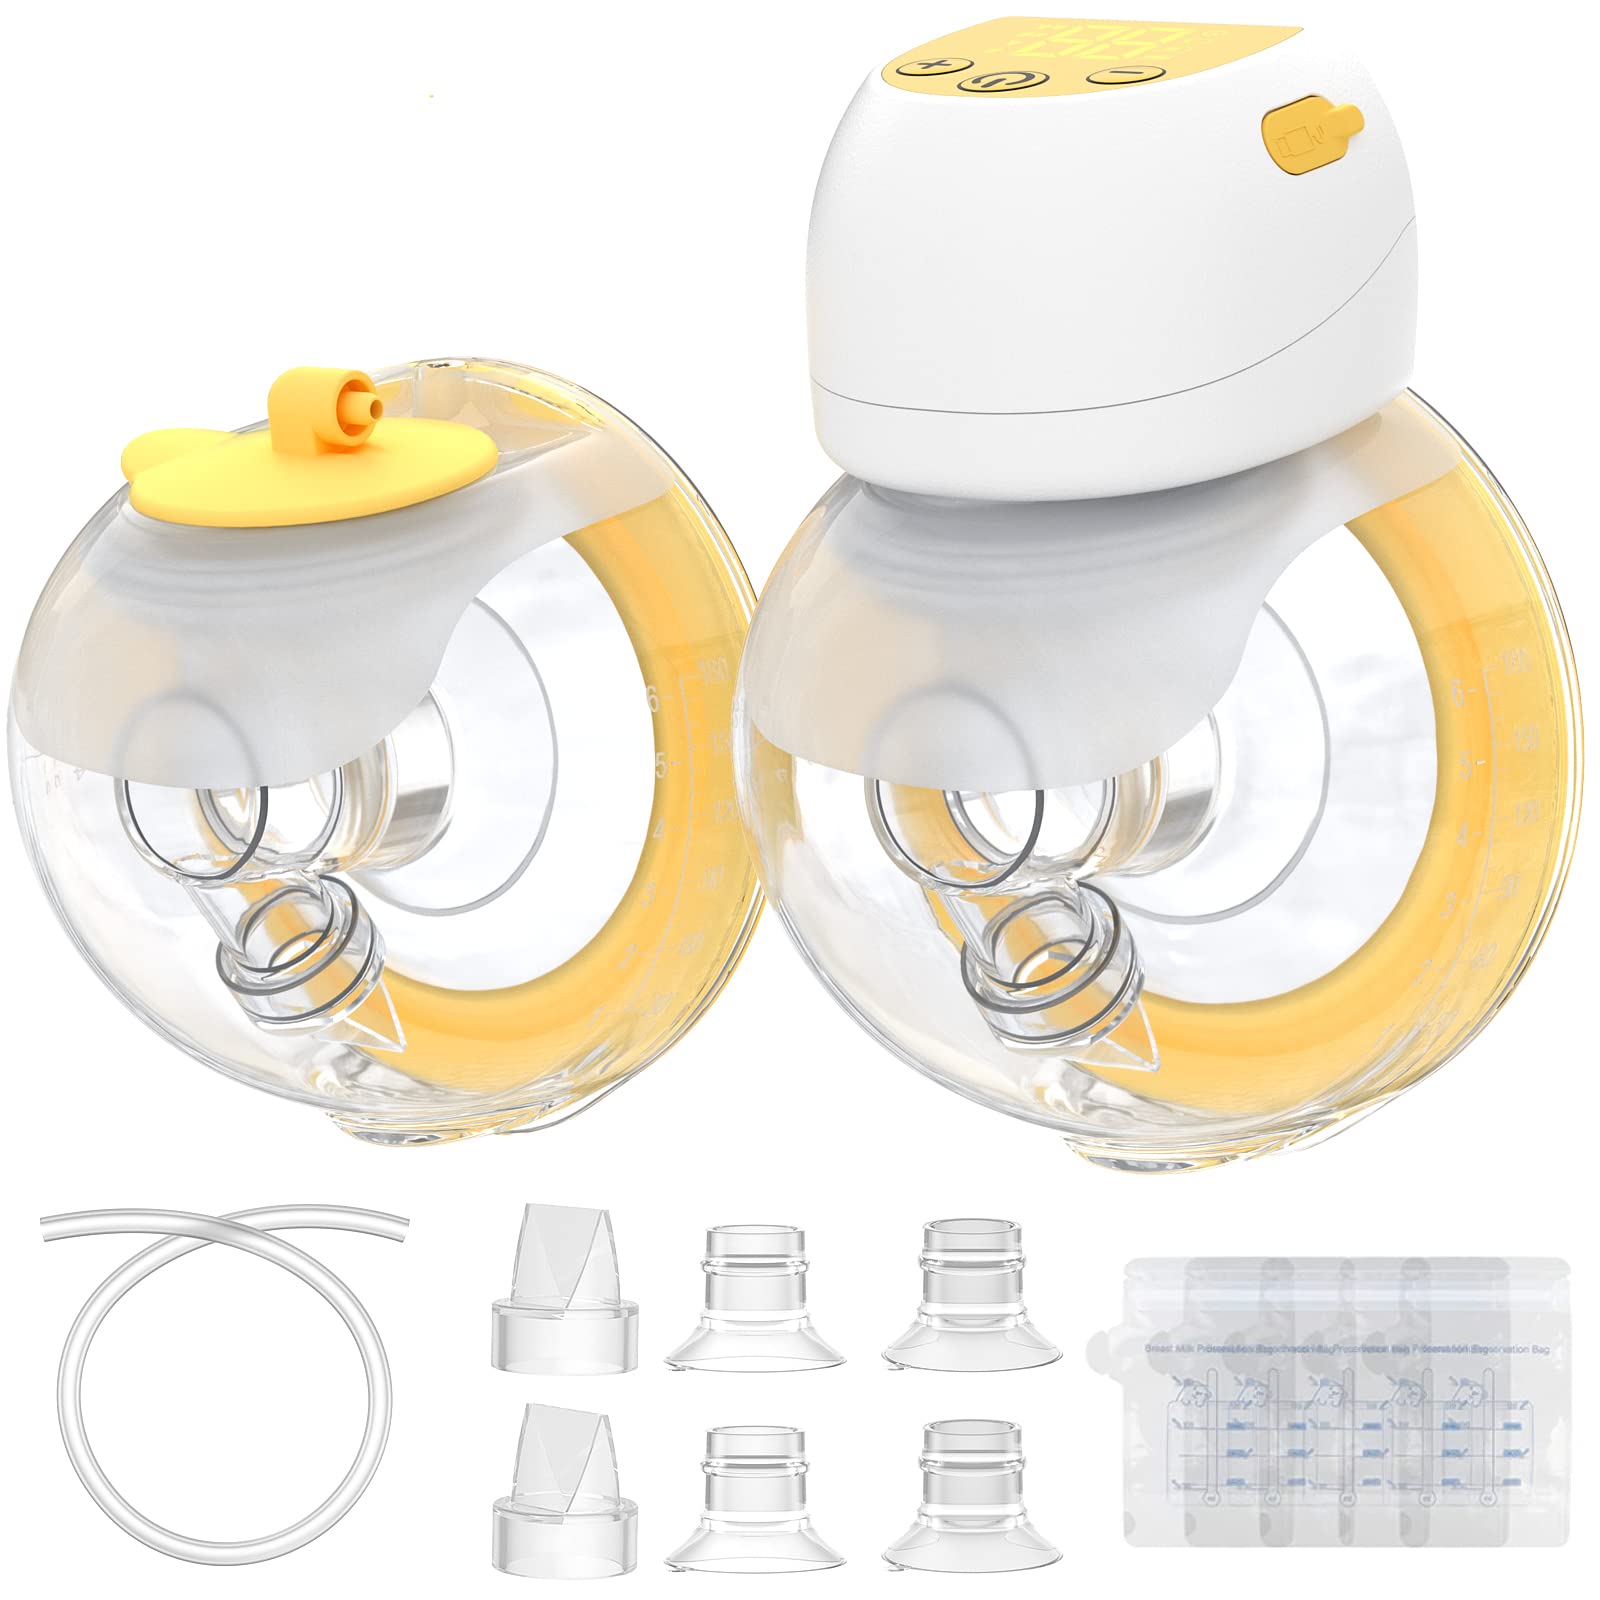 Double Wearable Breast Pump, SEOYO Hands Free Portable Electric Breast Breastfeeding Pump with LCD Display, with 3 Modes & 9 Levels Memory Function and Hands Free Painless